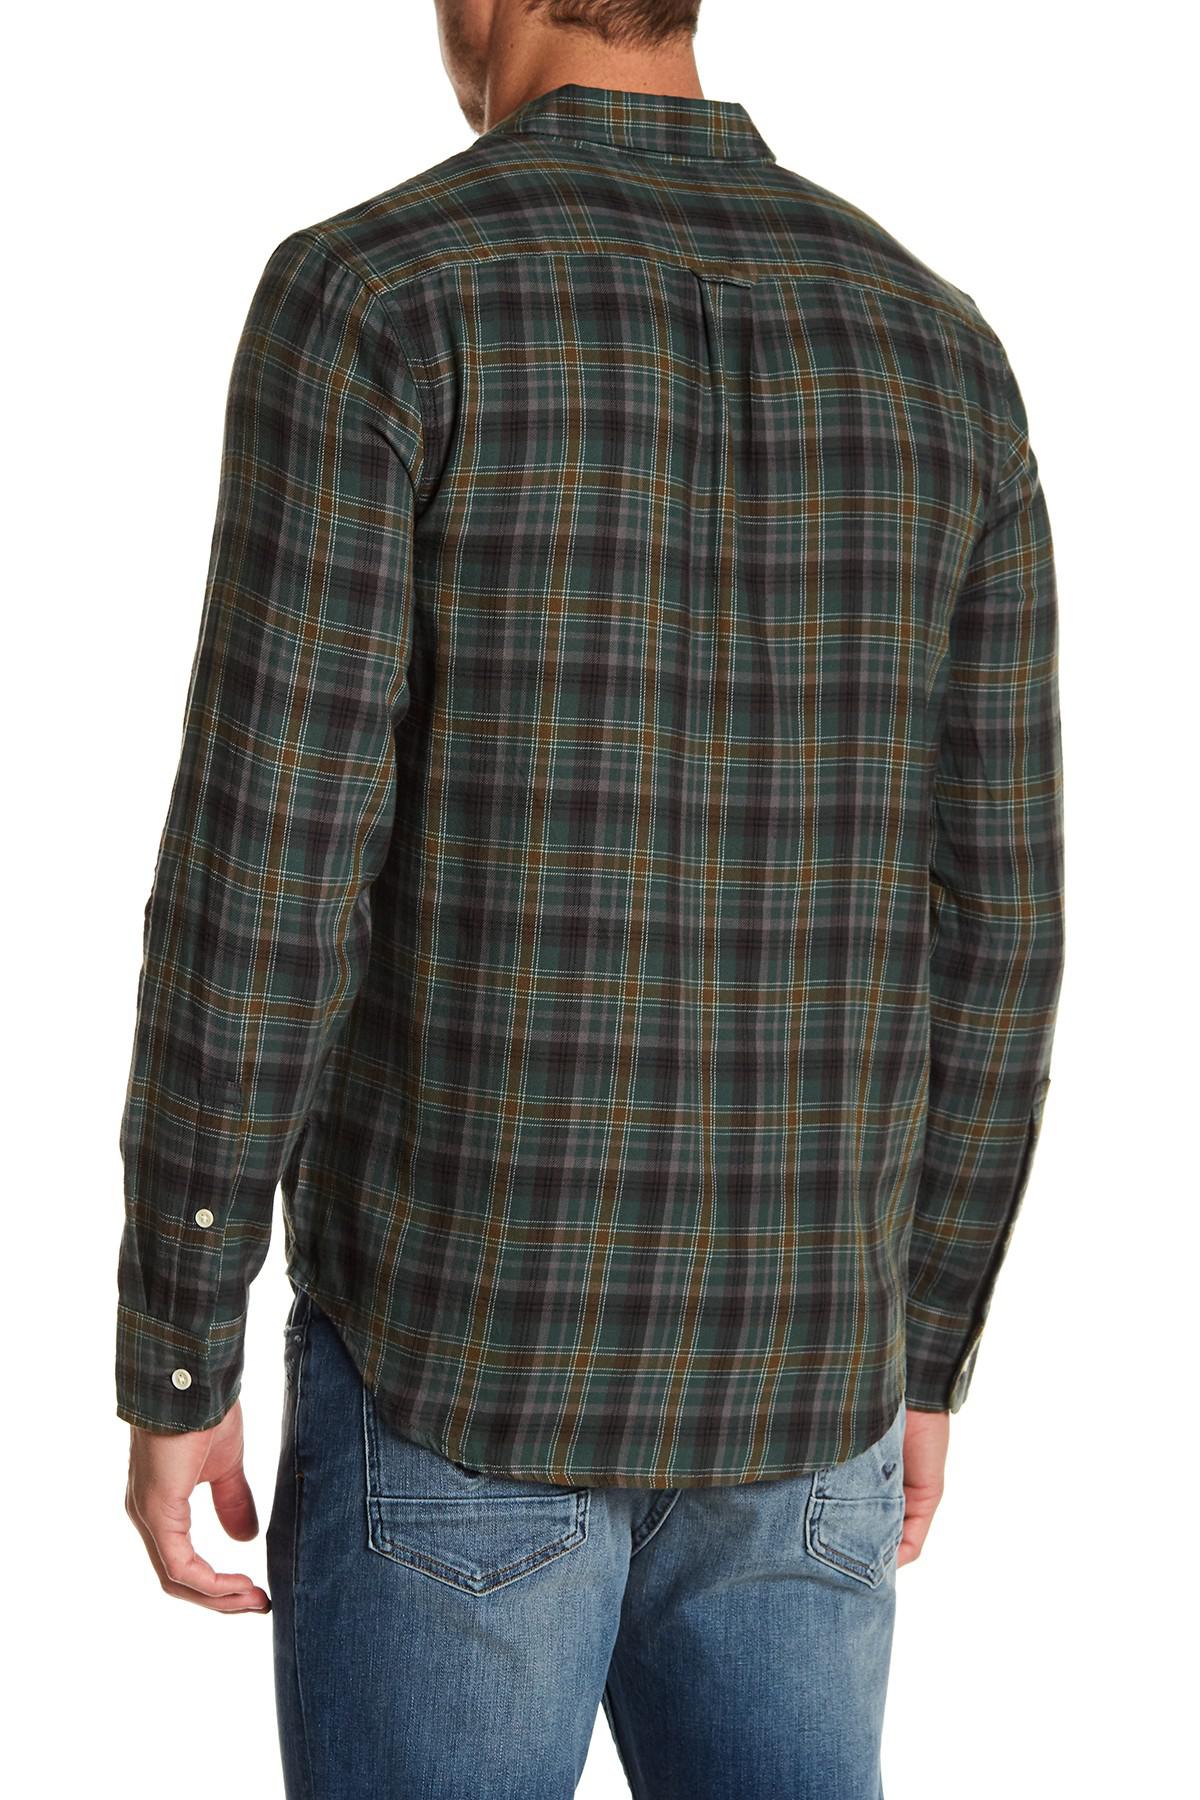 Lyst - Lucky Brand Clean Plaid Two Pocket Classic Fit Shirt for Men